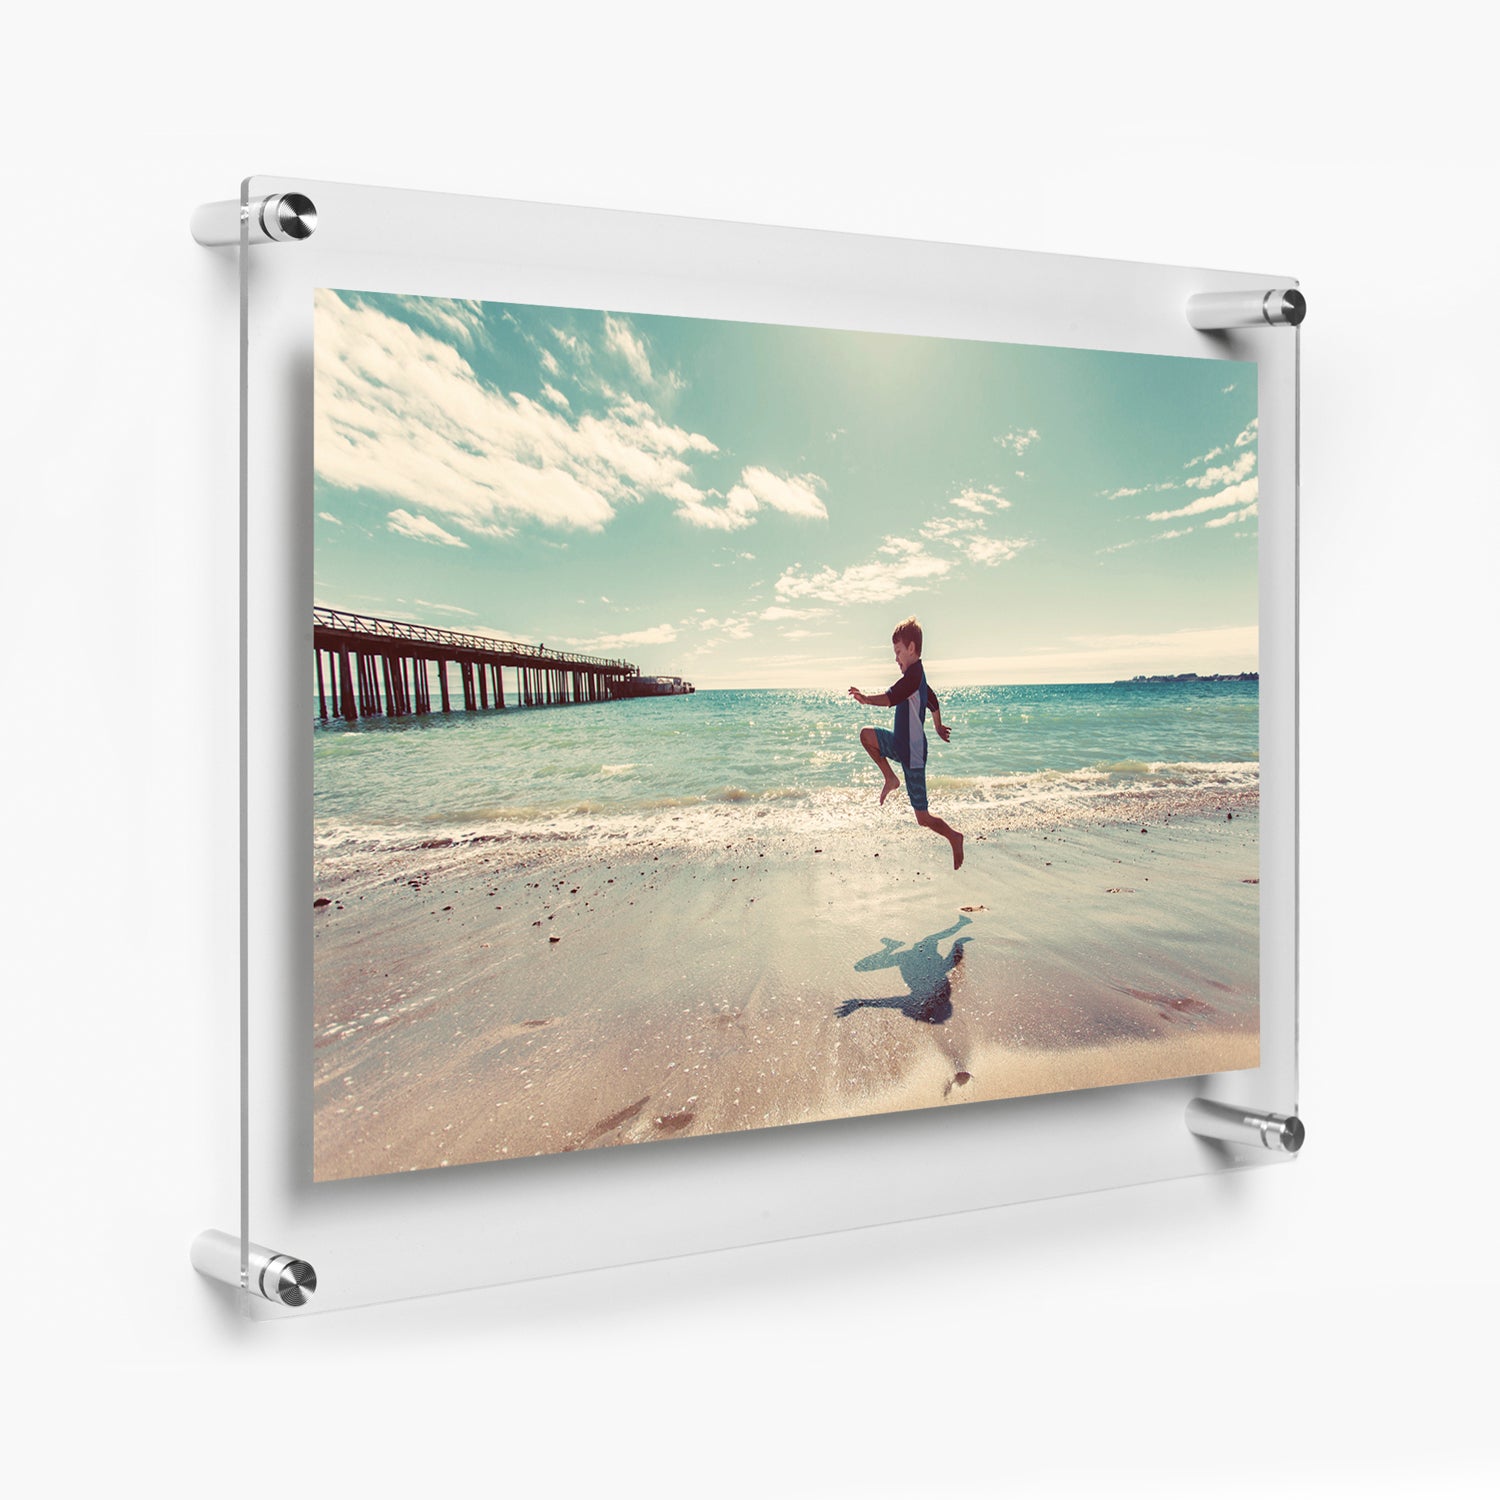 Wexel Art Double Panel Acrylic Display Frame - 23 inch x 33 inch, Silver Hardware